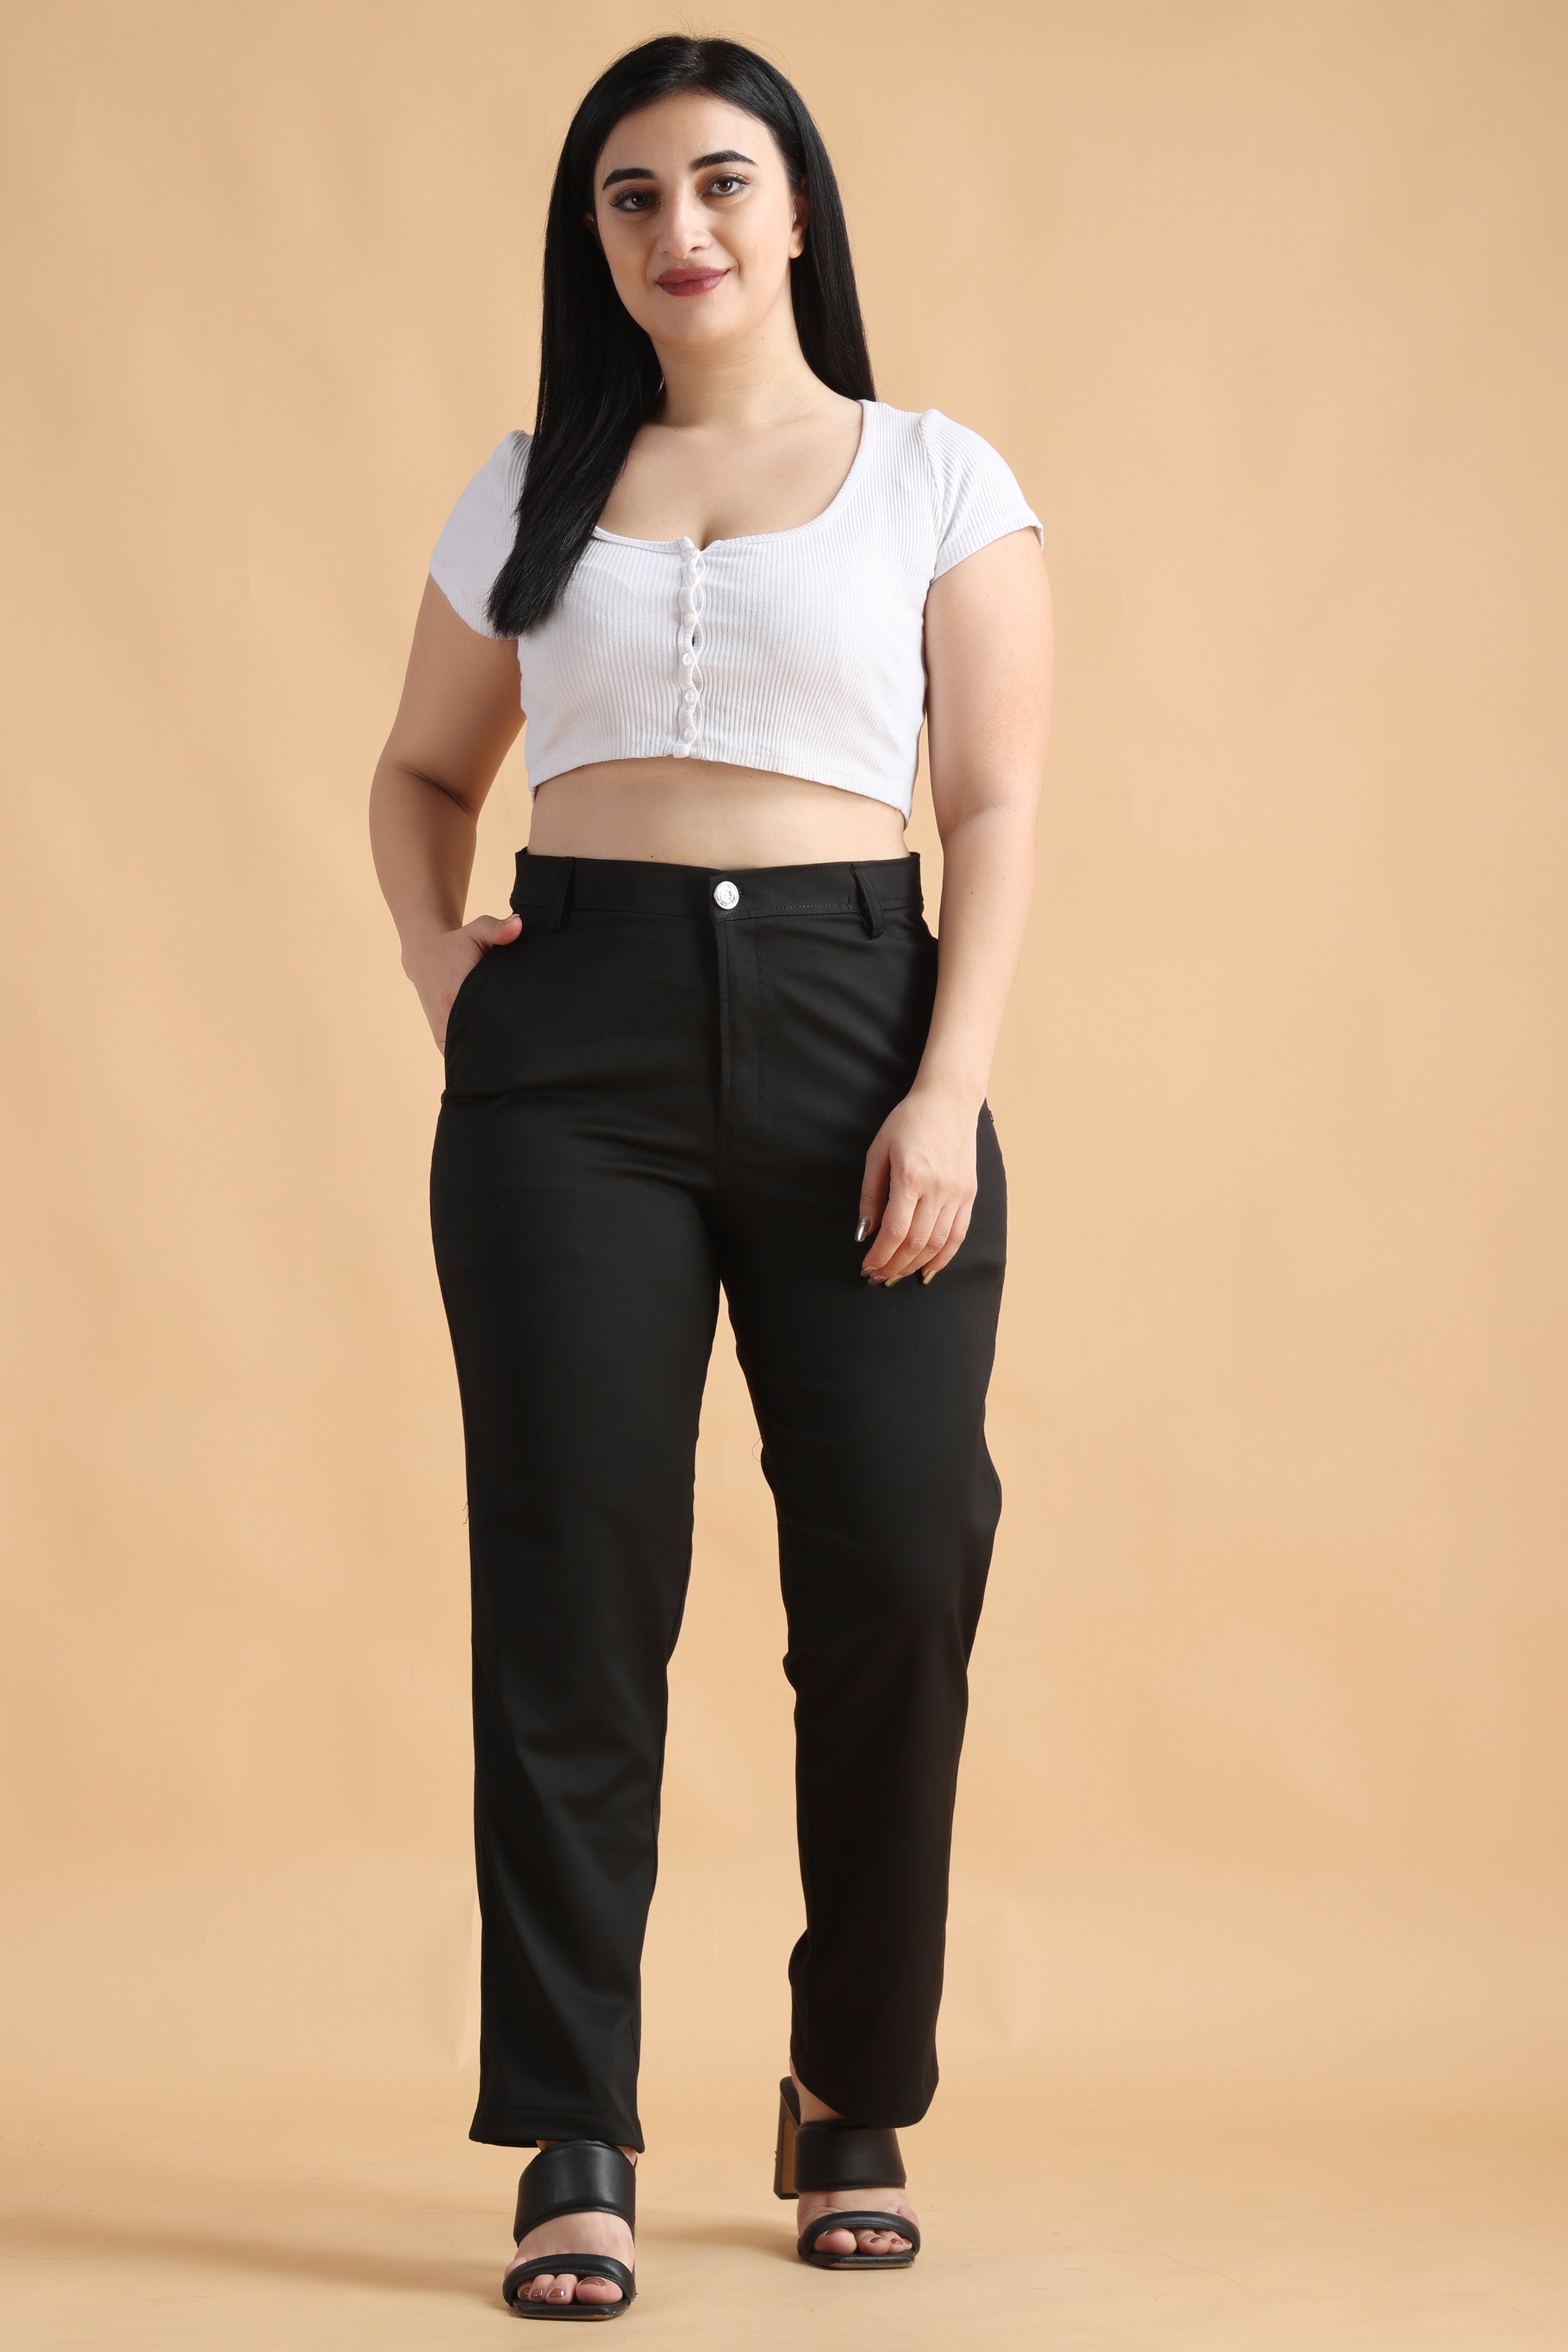 8 Best black trousers outfit party ideas  how to wear fashion black  trousers outfit party